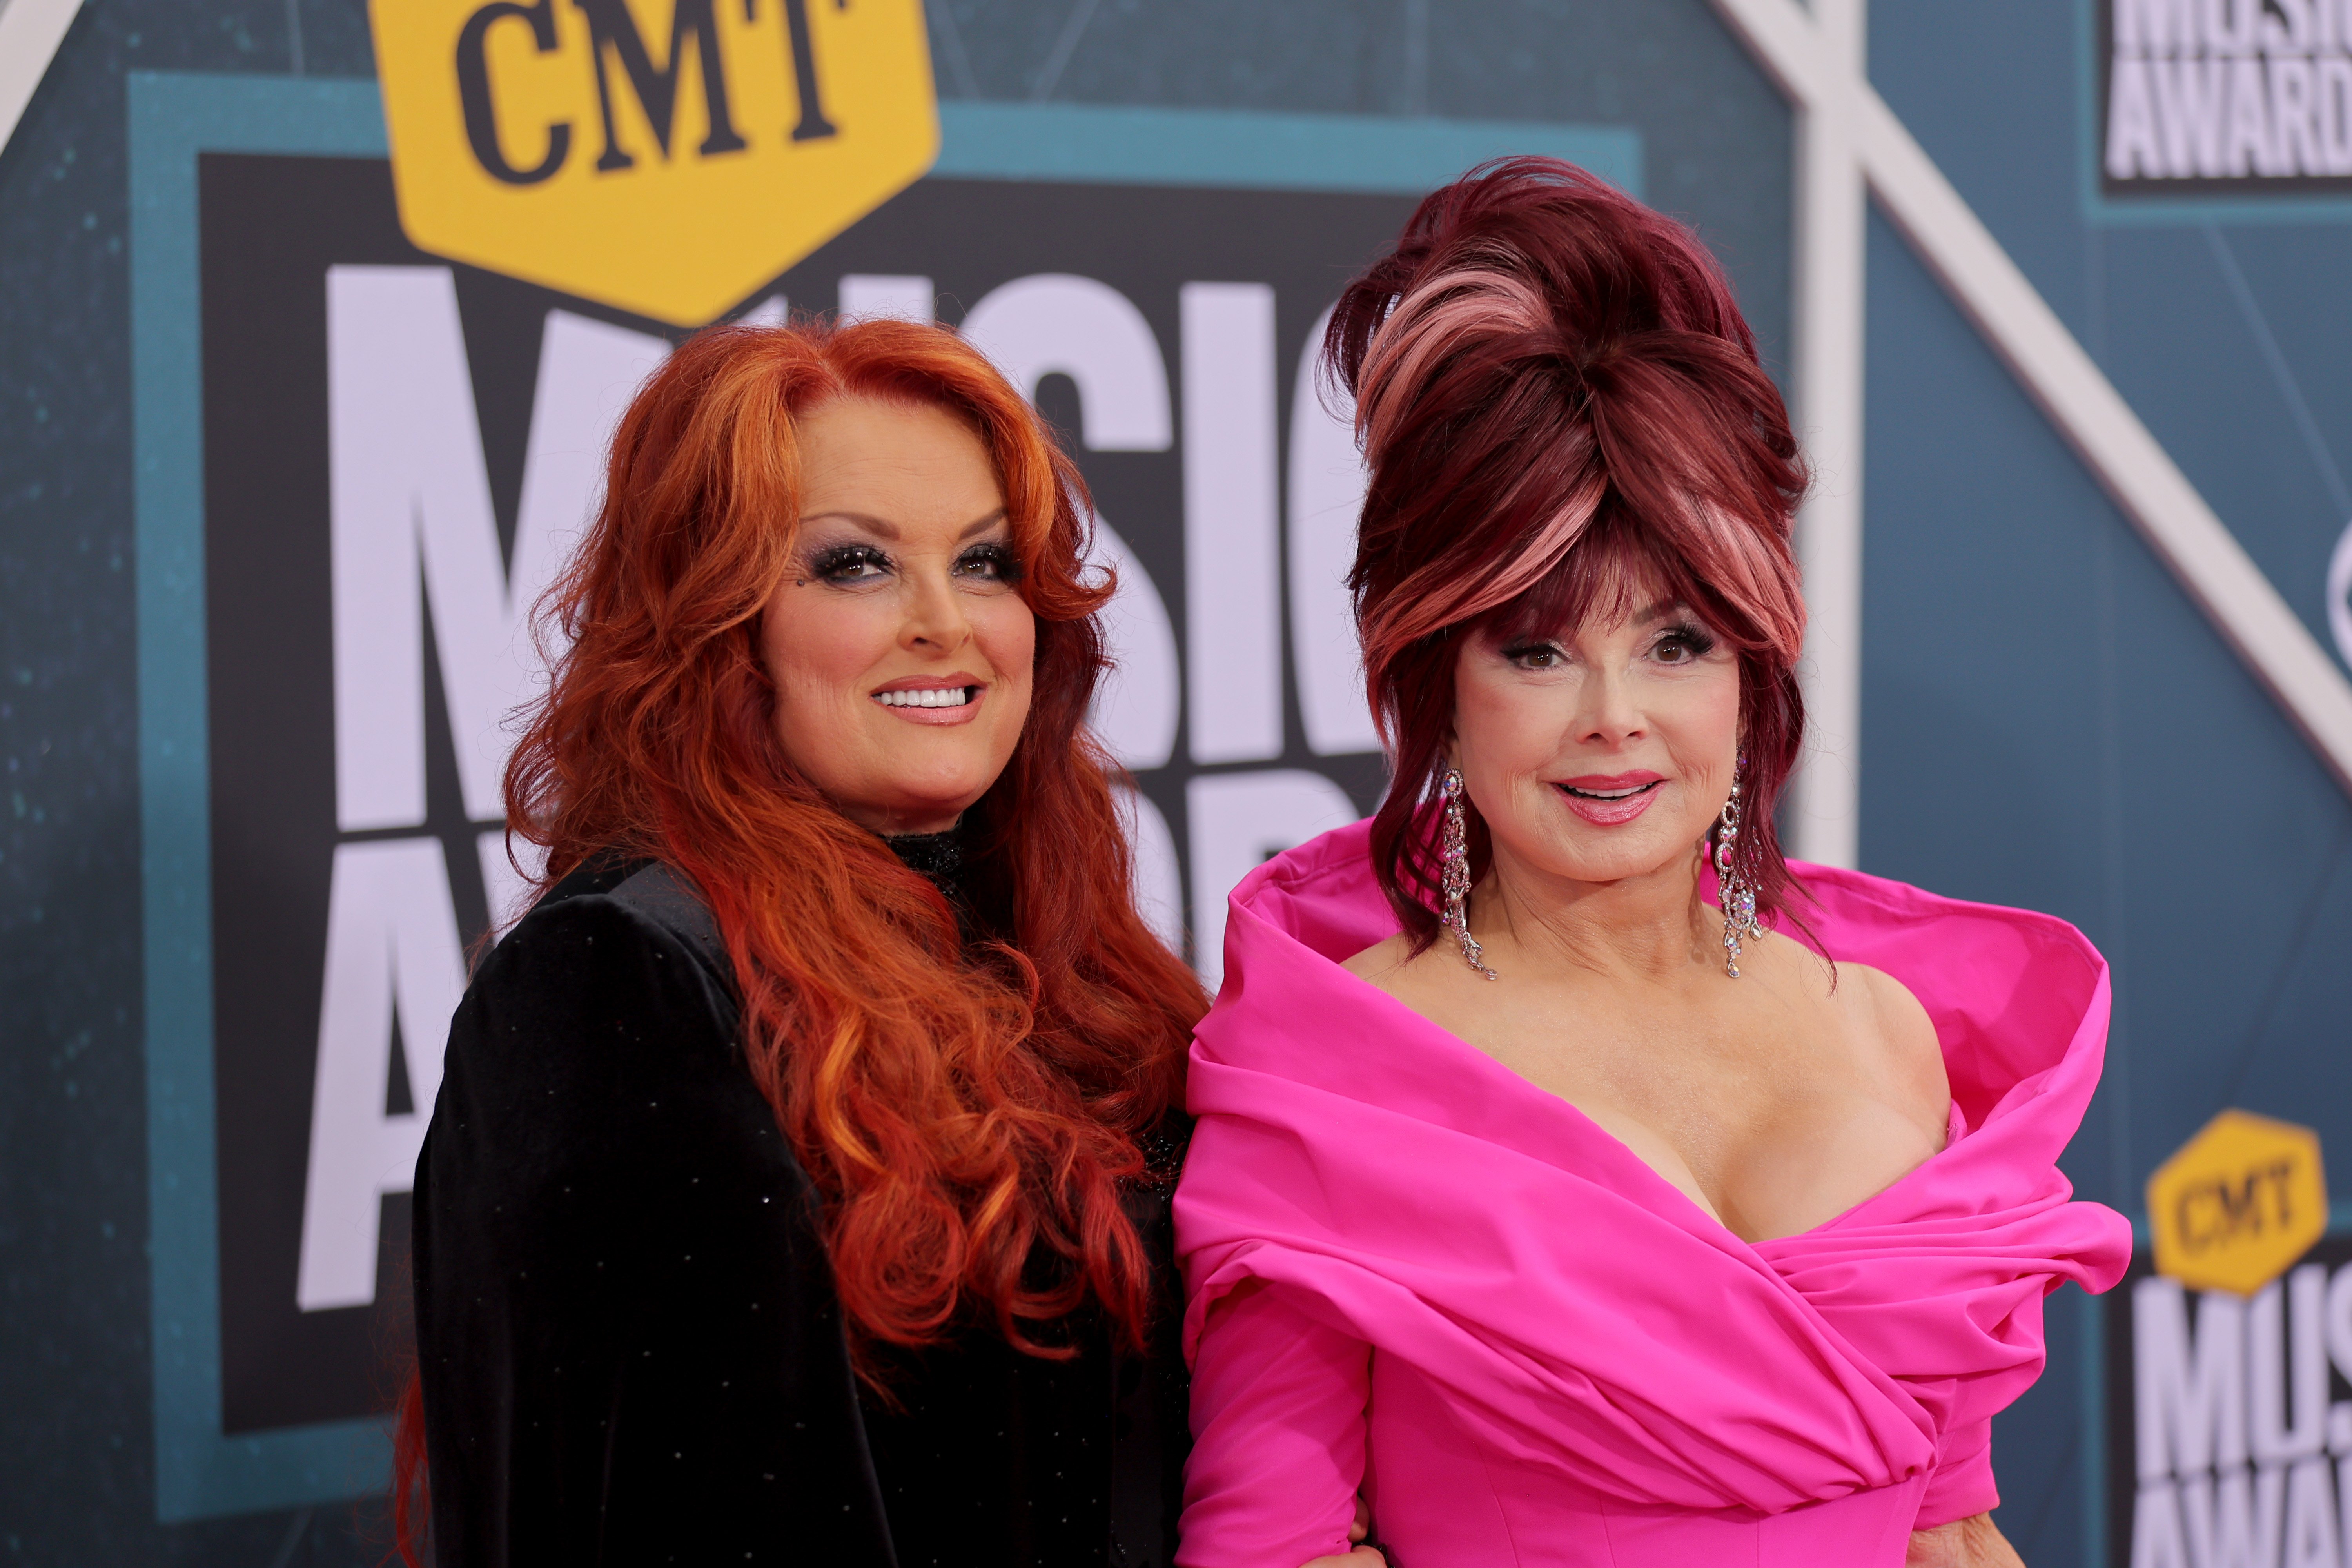 Wynonna Judd and Naomi Judd at the 2022 CMT Music Awards at Nashville Municipal Auditorium on April 11, 2022 in Nashville, Tennessee.  | Source: Getty Images